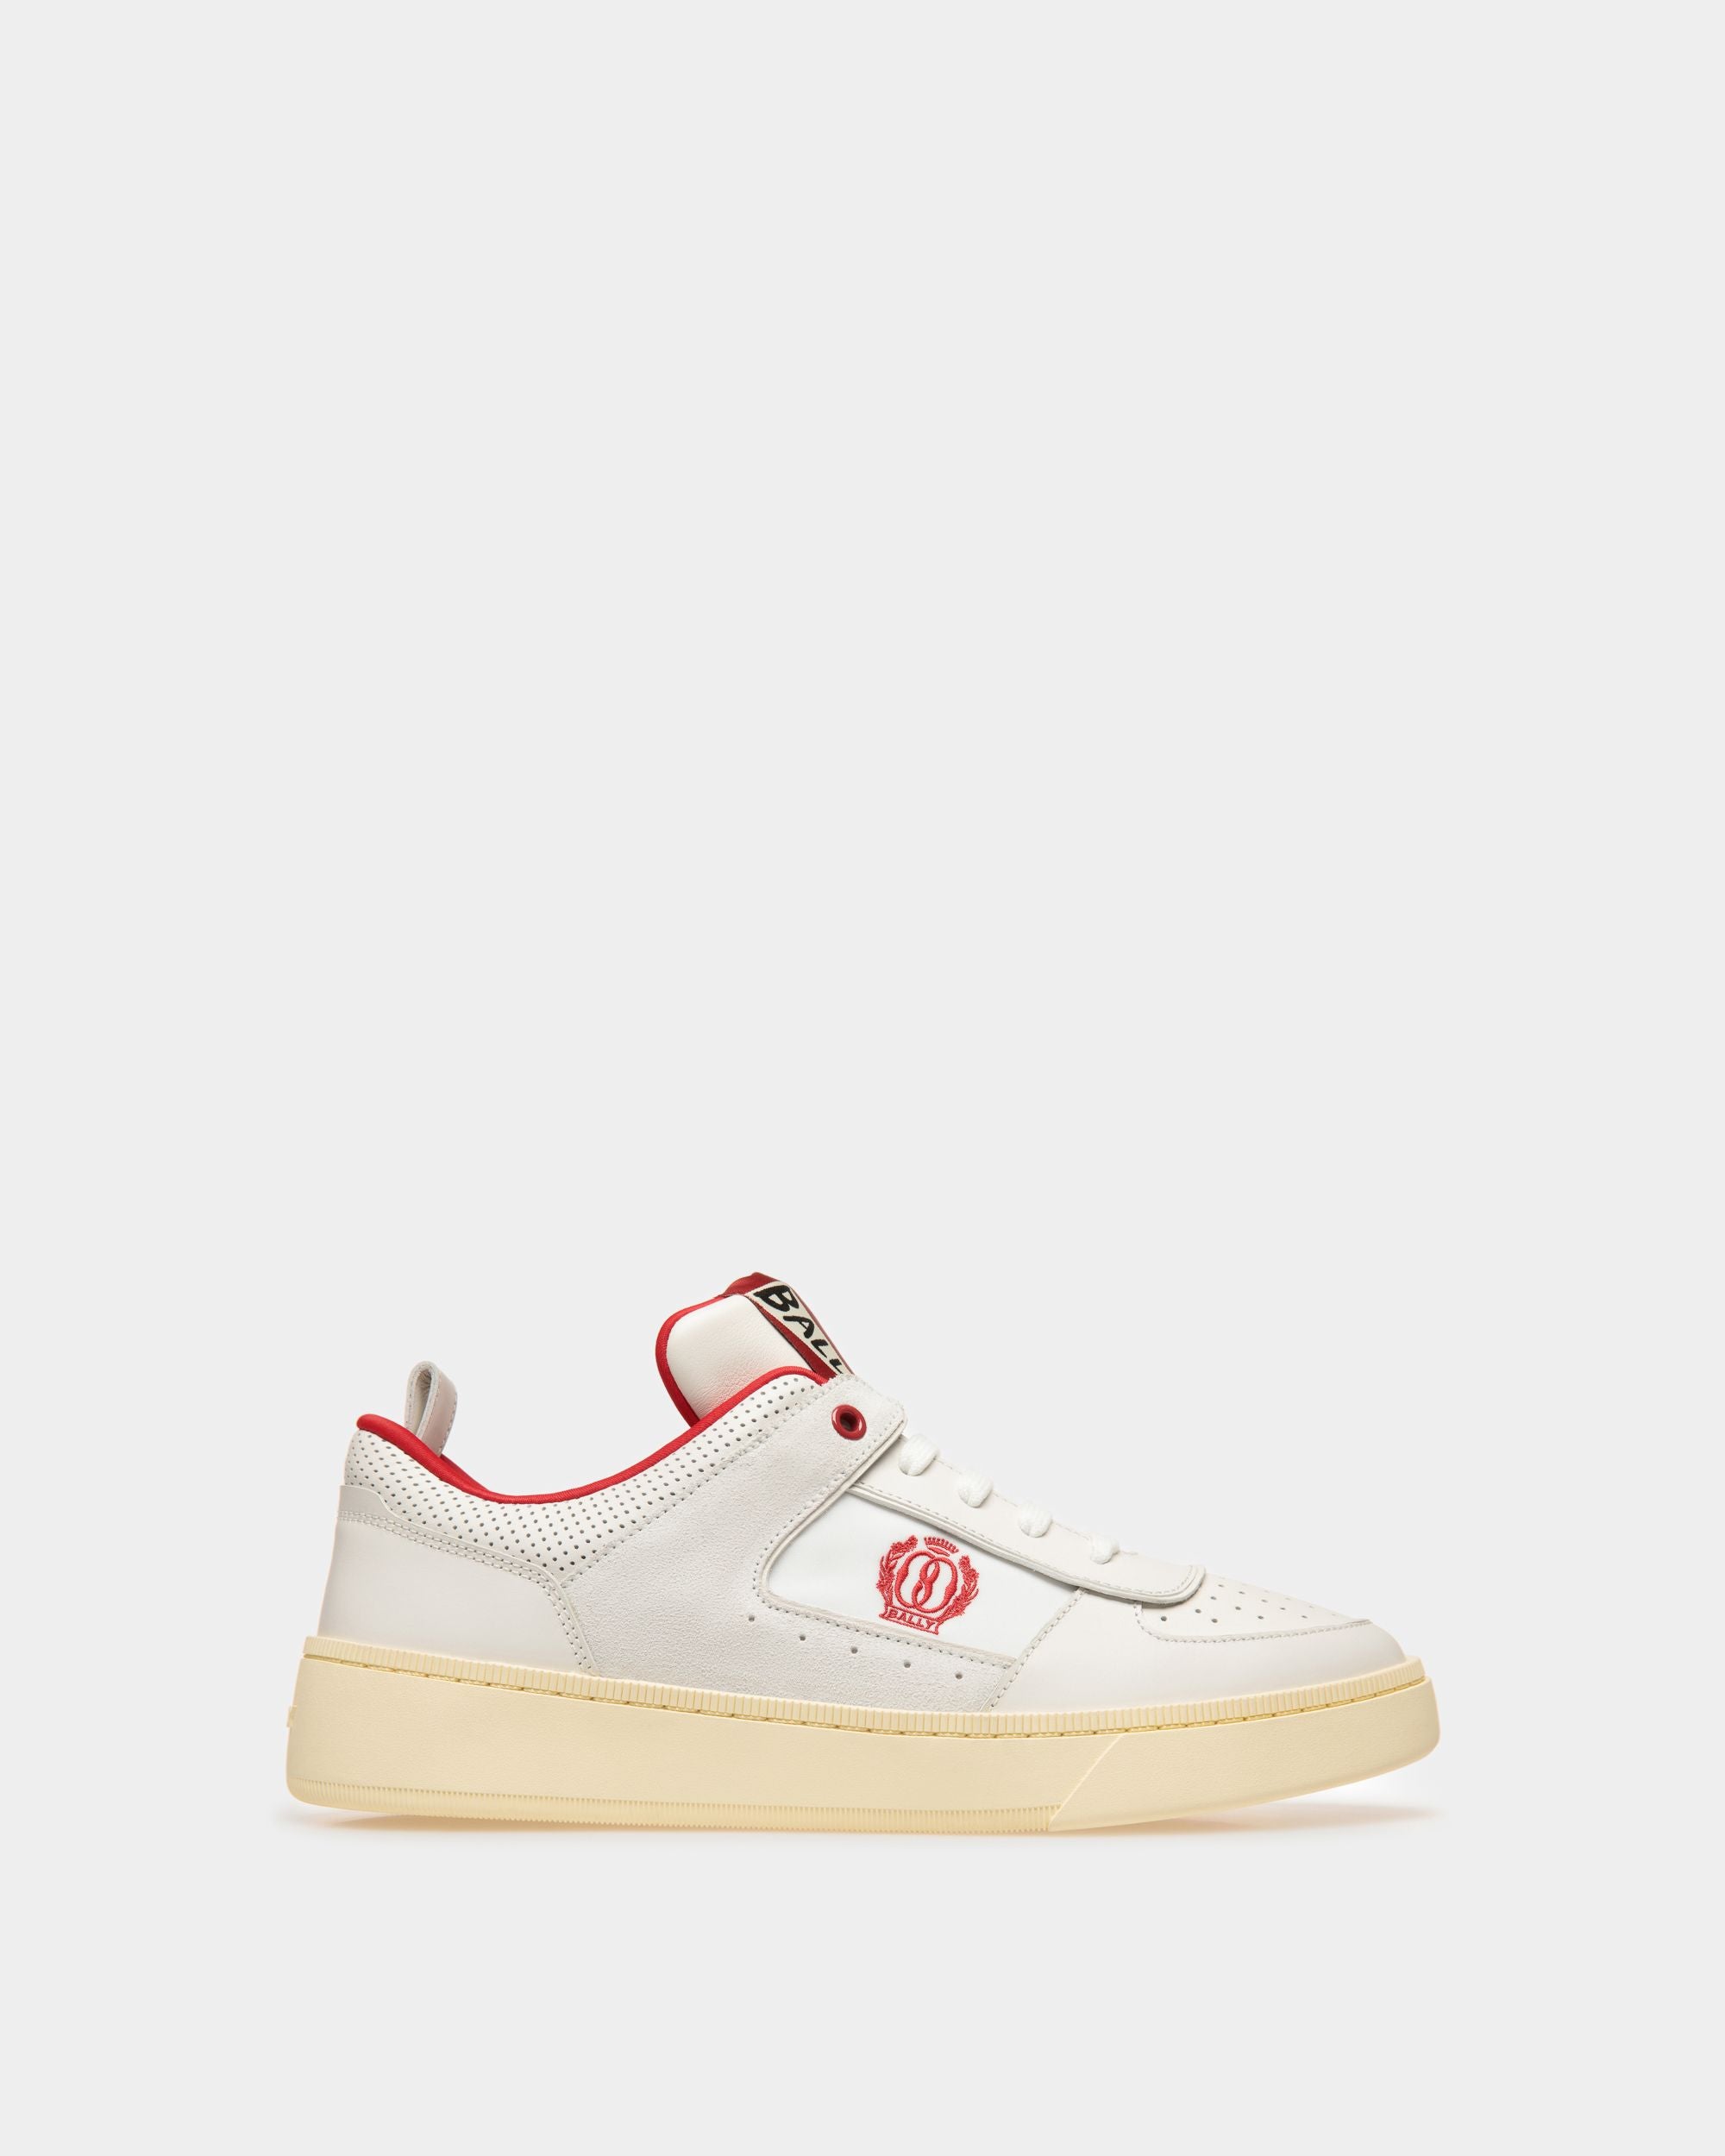 Riweira | Men's Sneakers | White Leather | Bally | Still Life Side